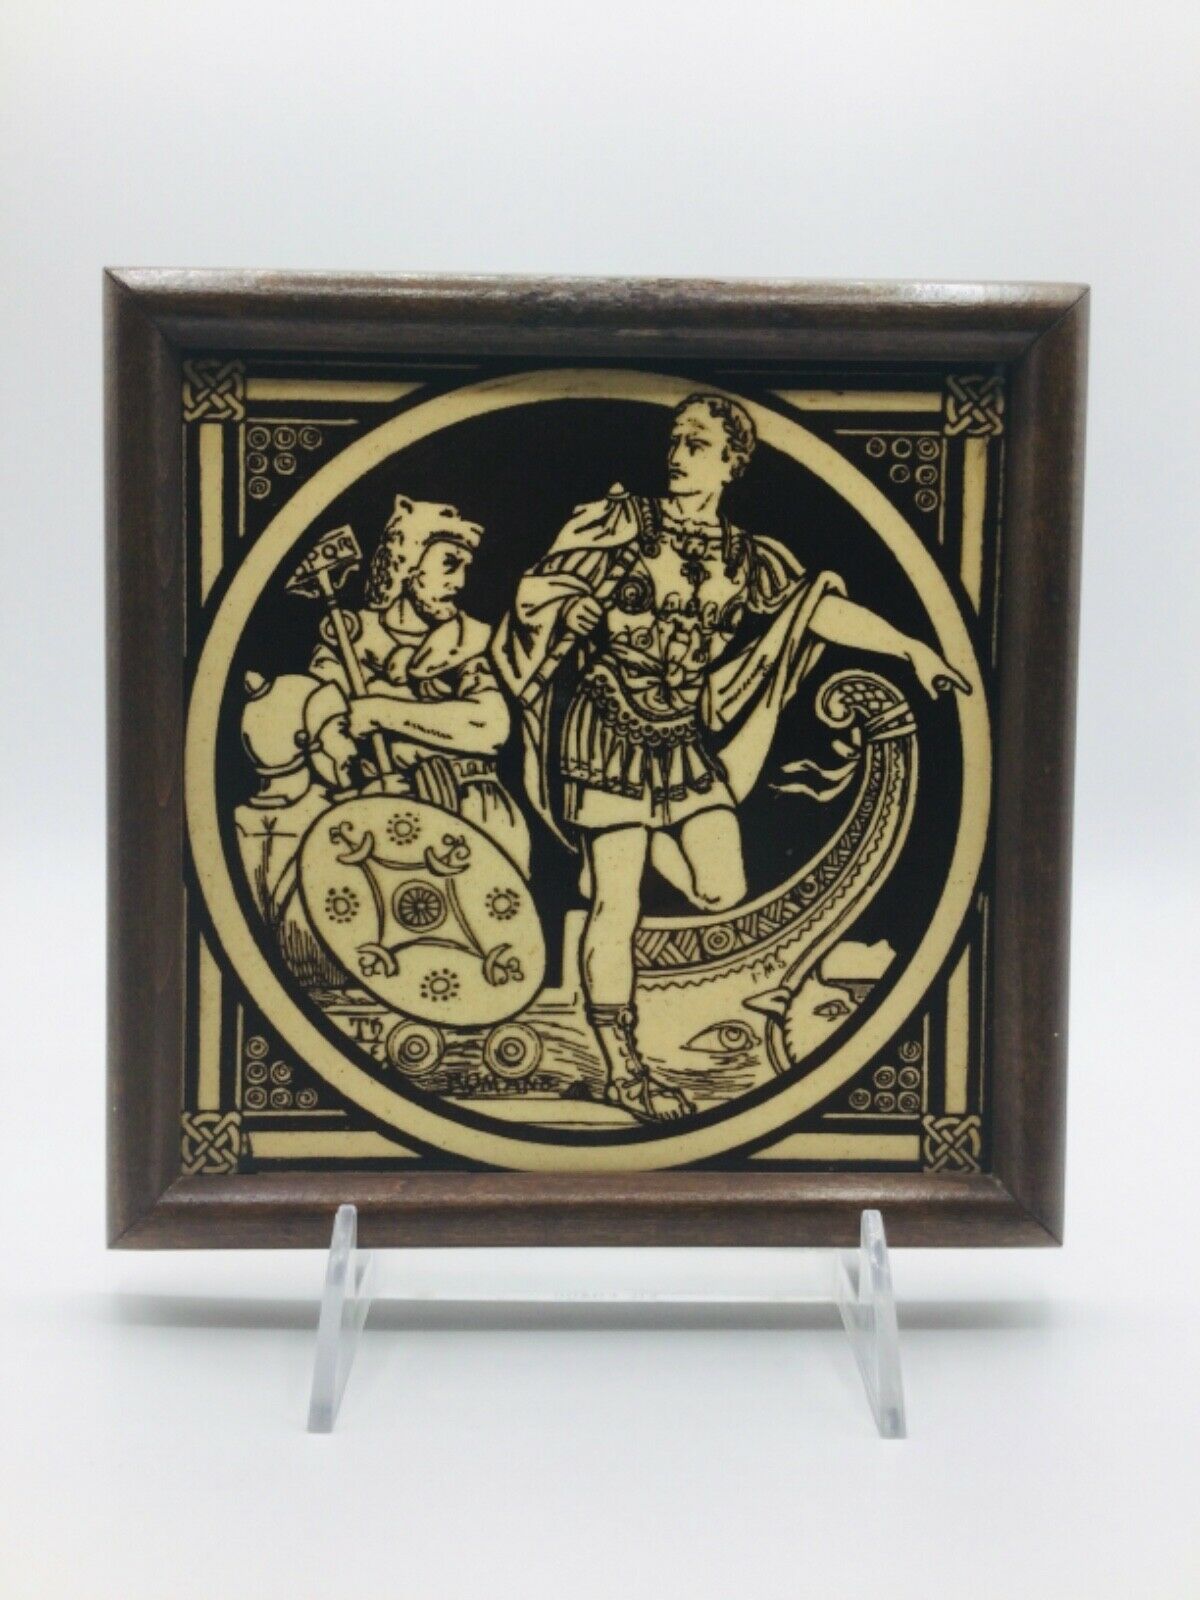 Antique Mintons China Works England Stoke On Trent Roman Soldiers Ceramic Tile